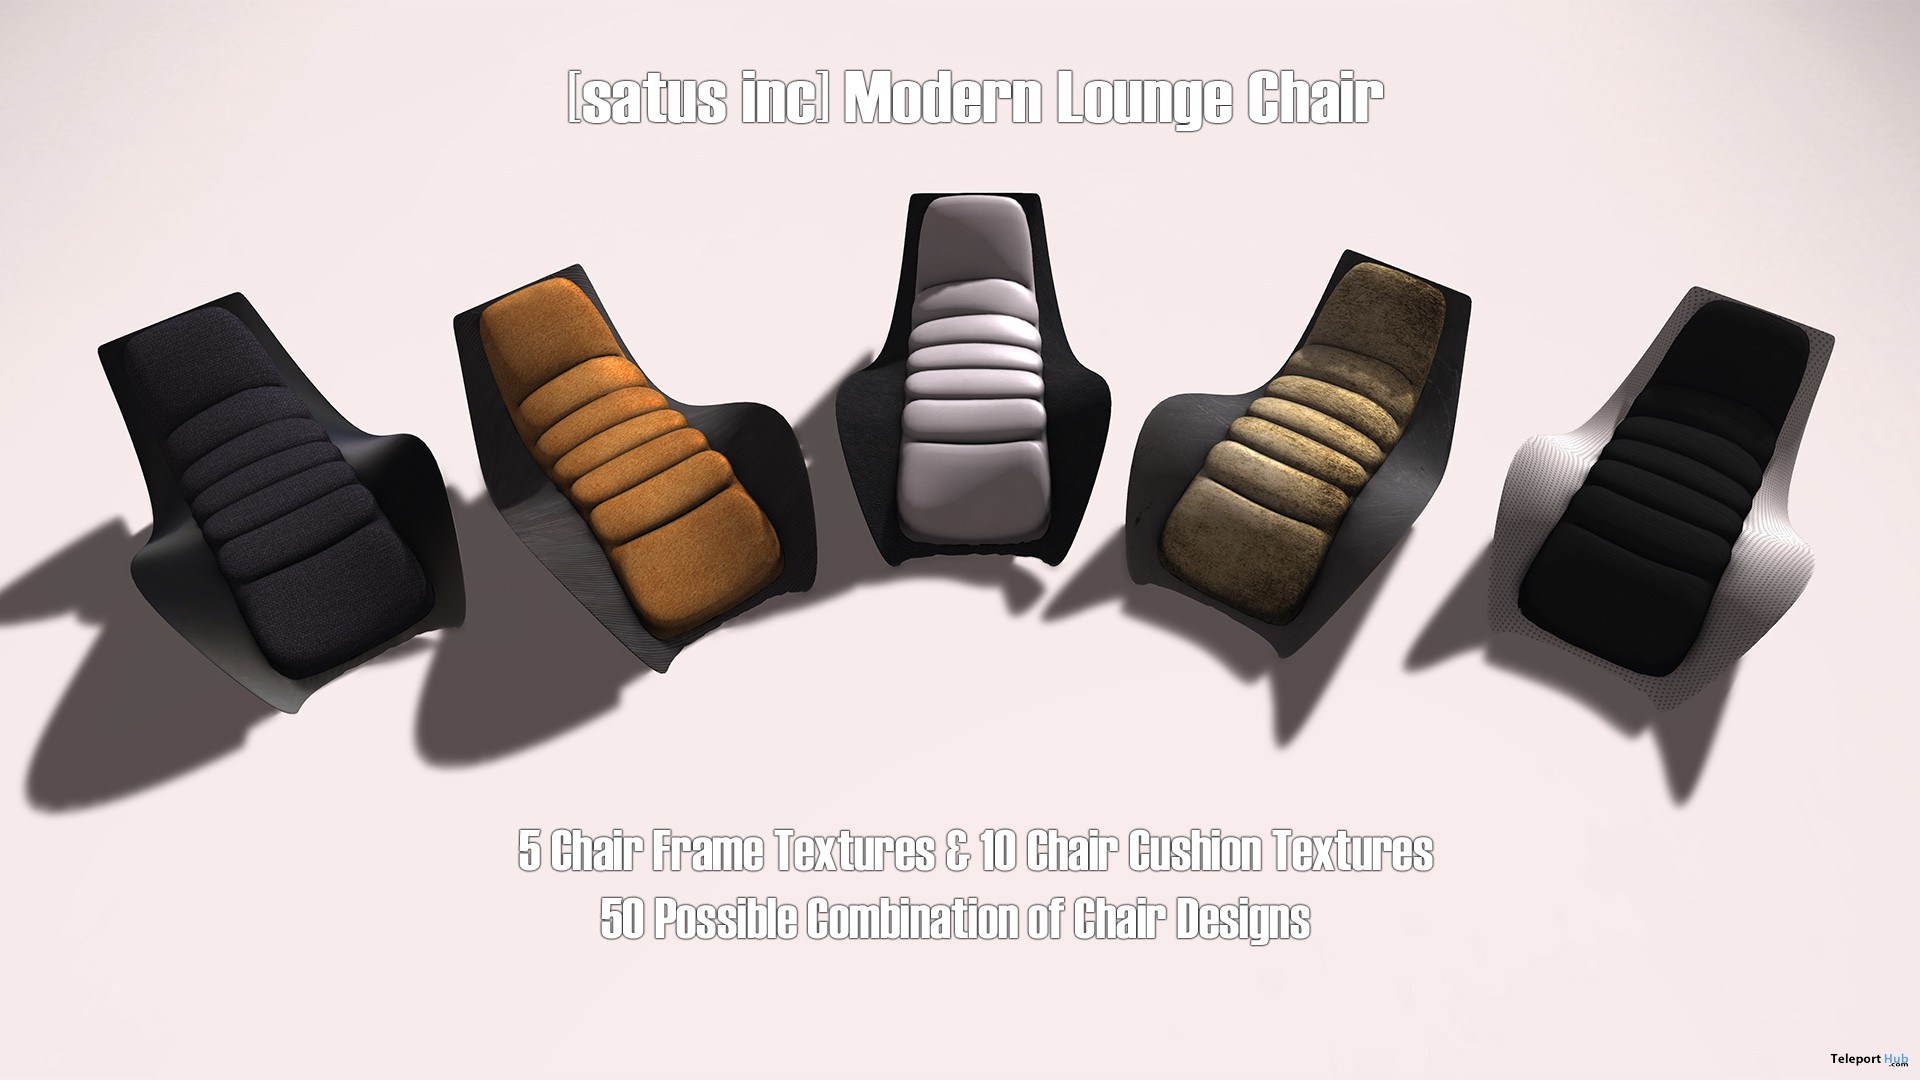 New Release: Modern Lounge Chair (Adult & PG) by [satus Inc] - Teleport Hub - teleporthub.com